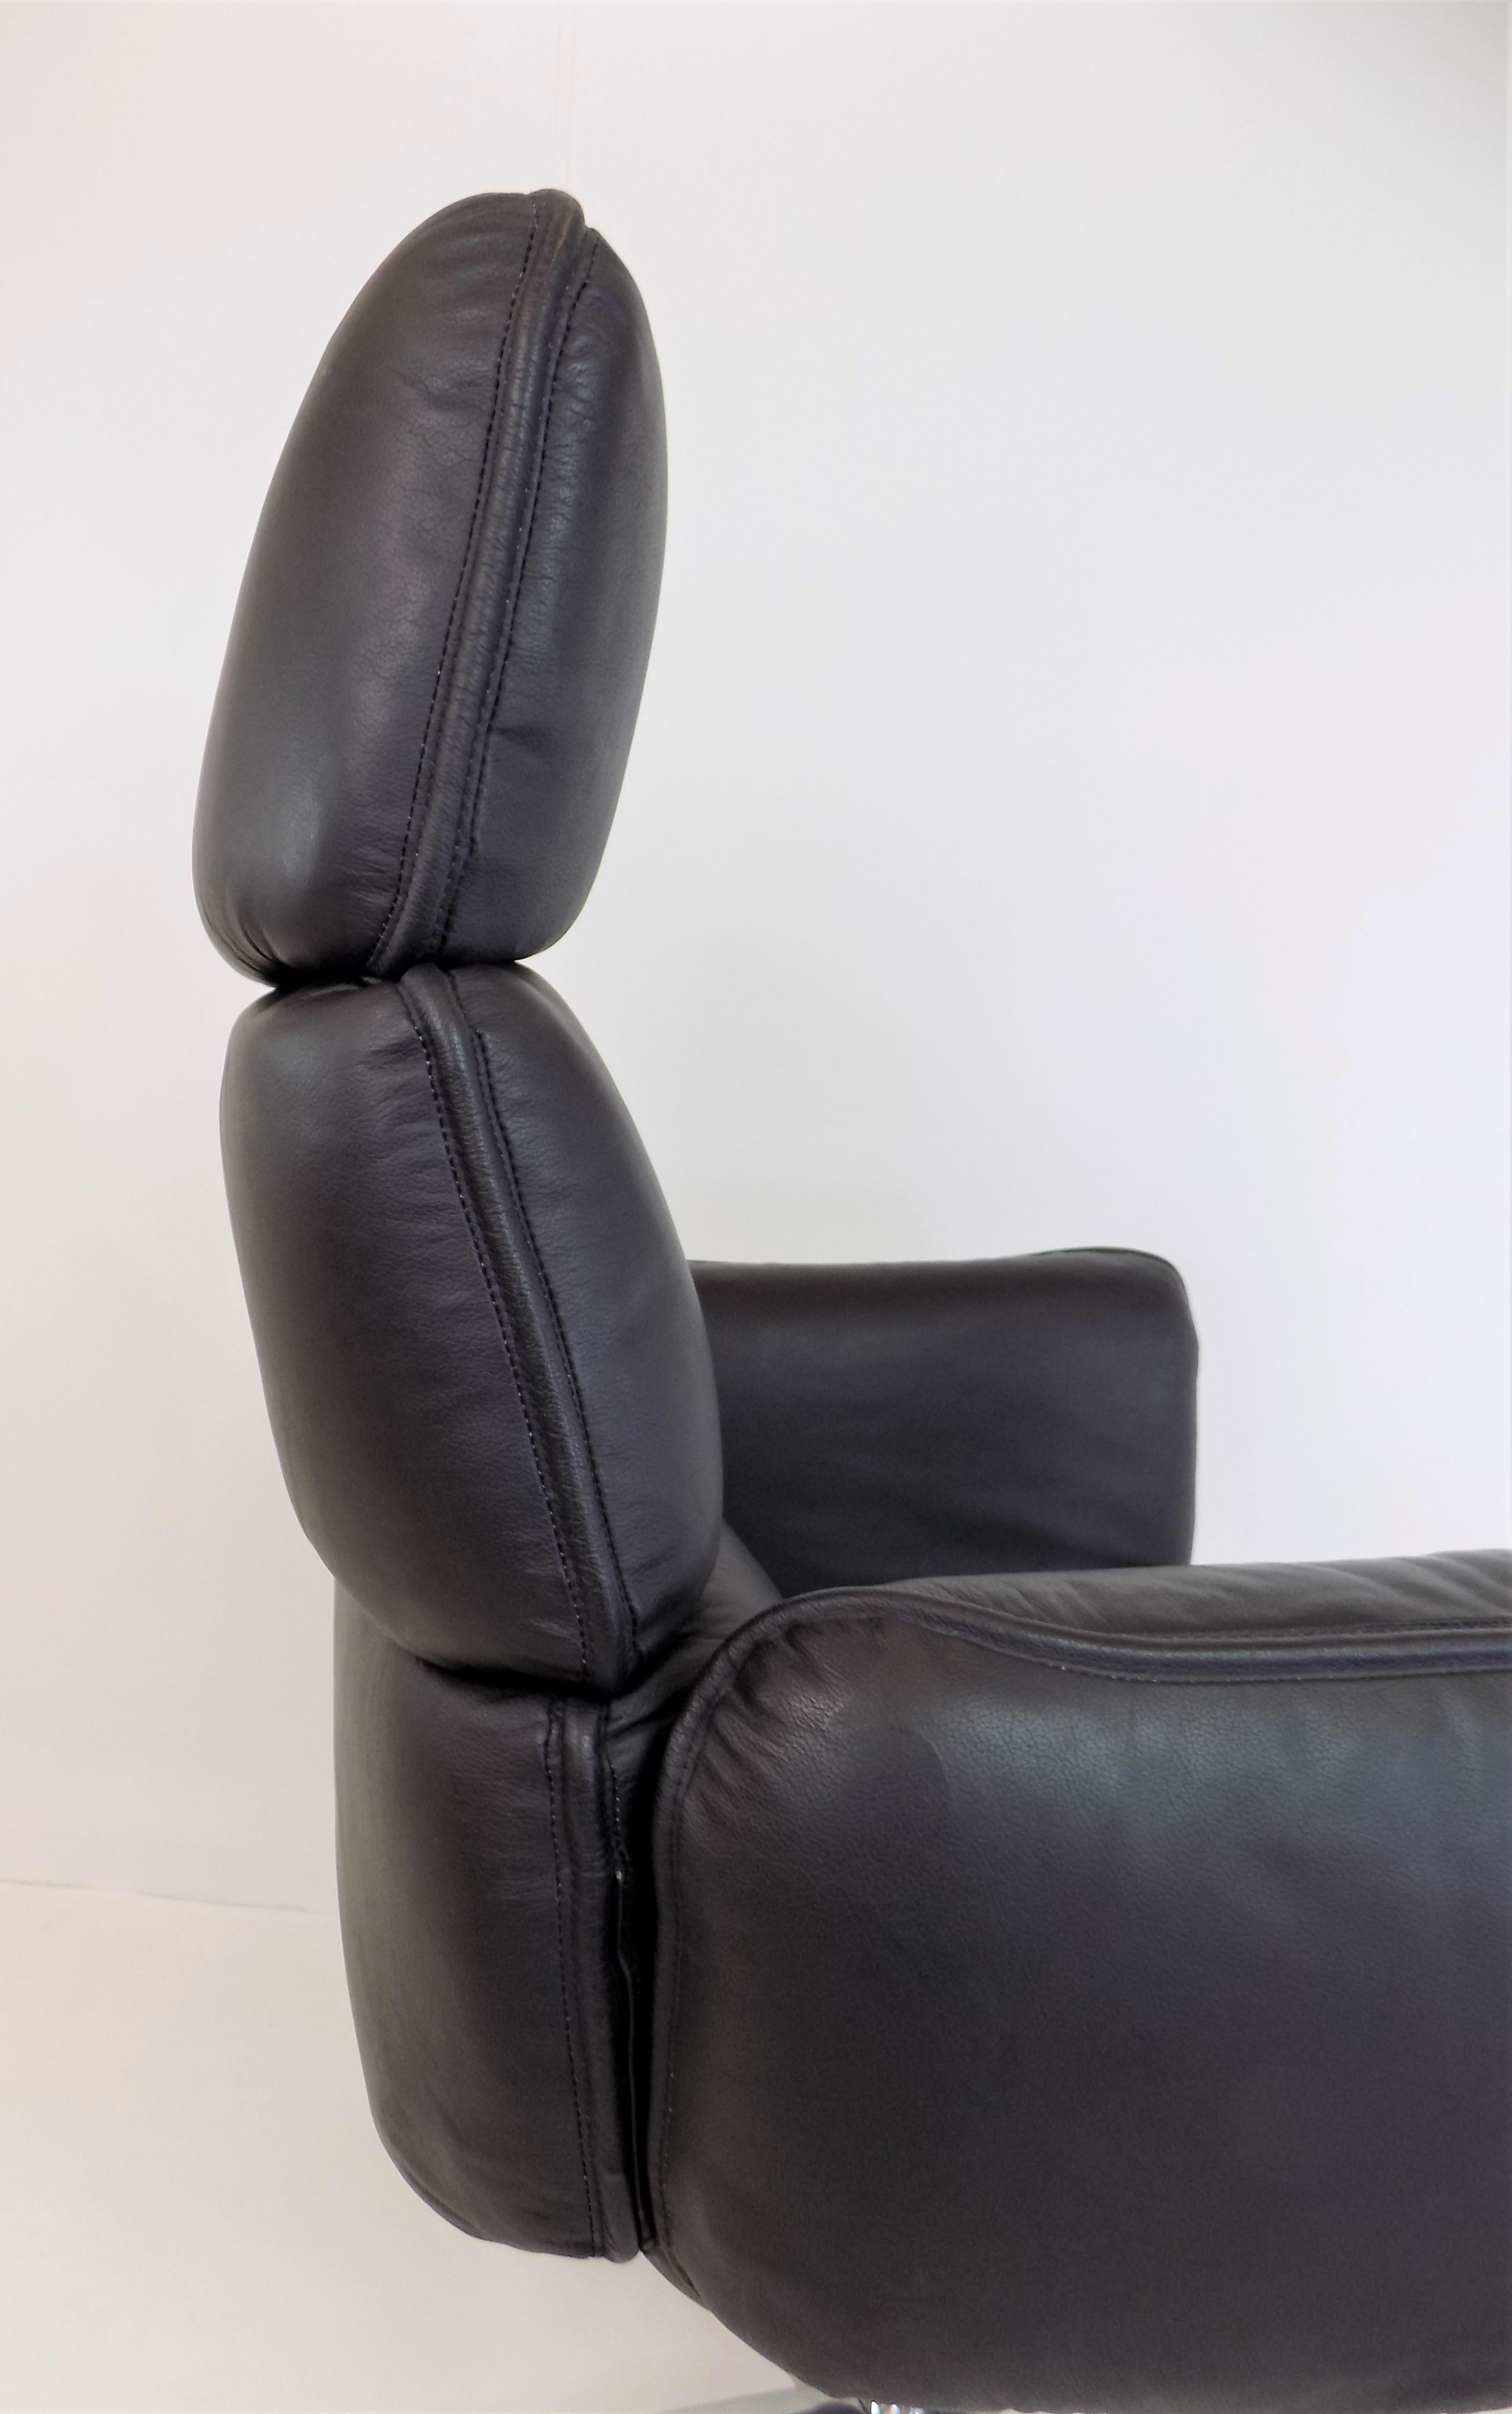 Otto Zapf Leather Office Chair for Topstar 7